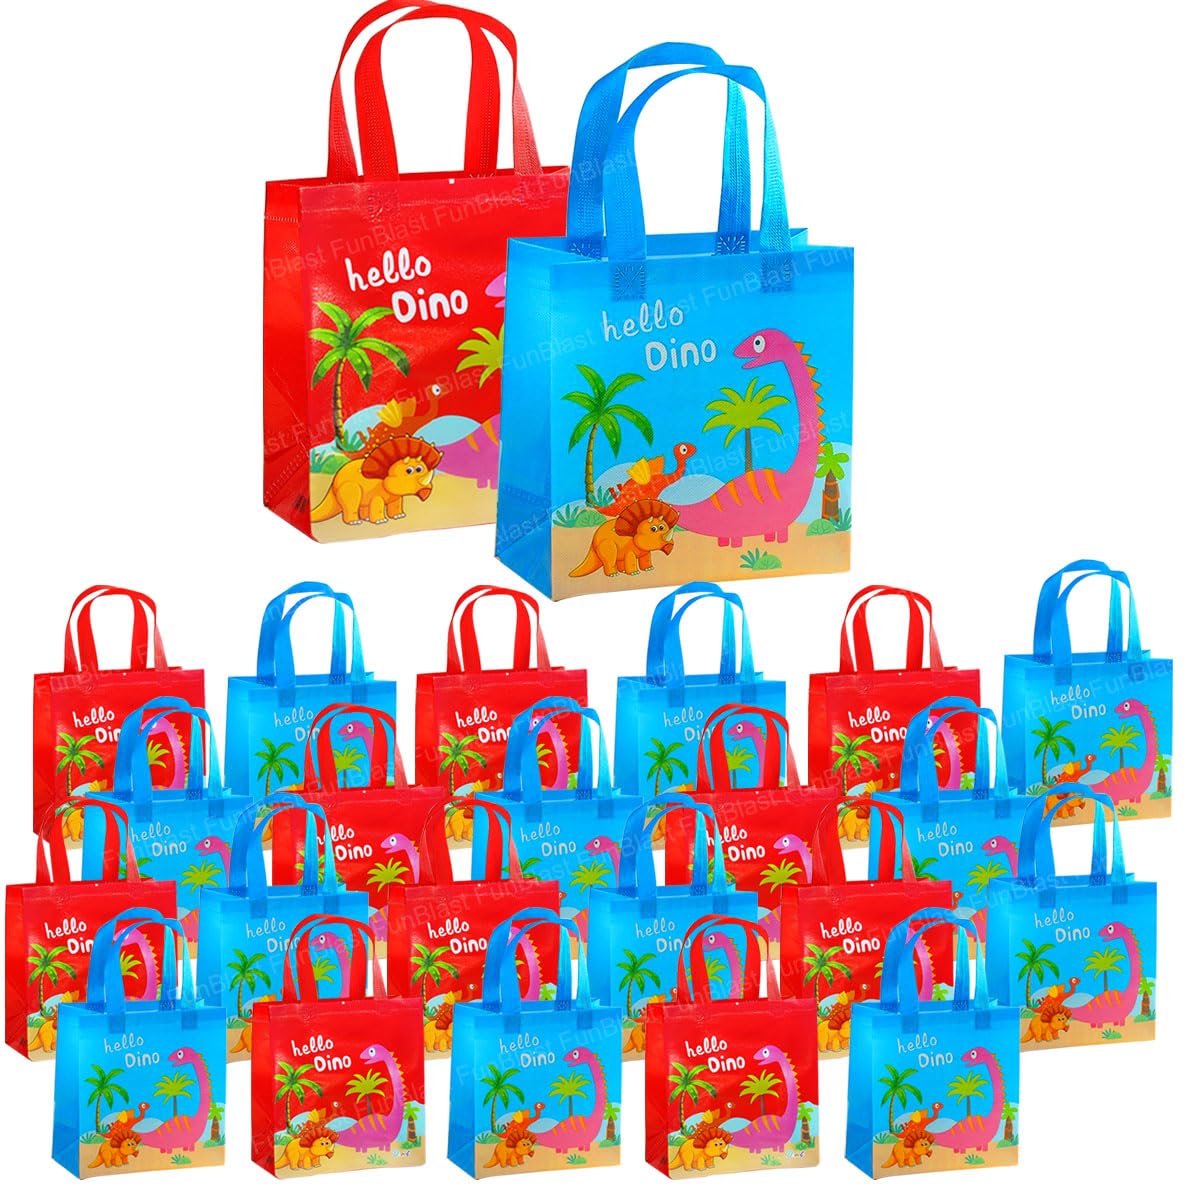 Dinosaur Gifting Bags for Return Gifts